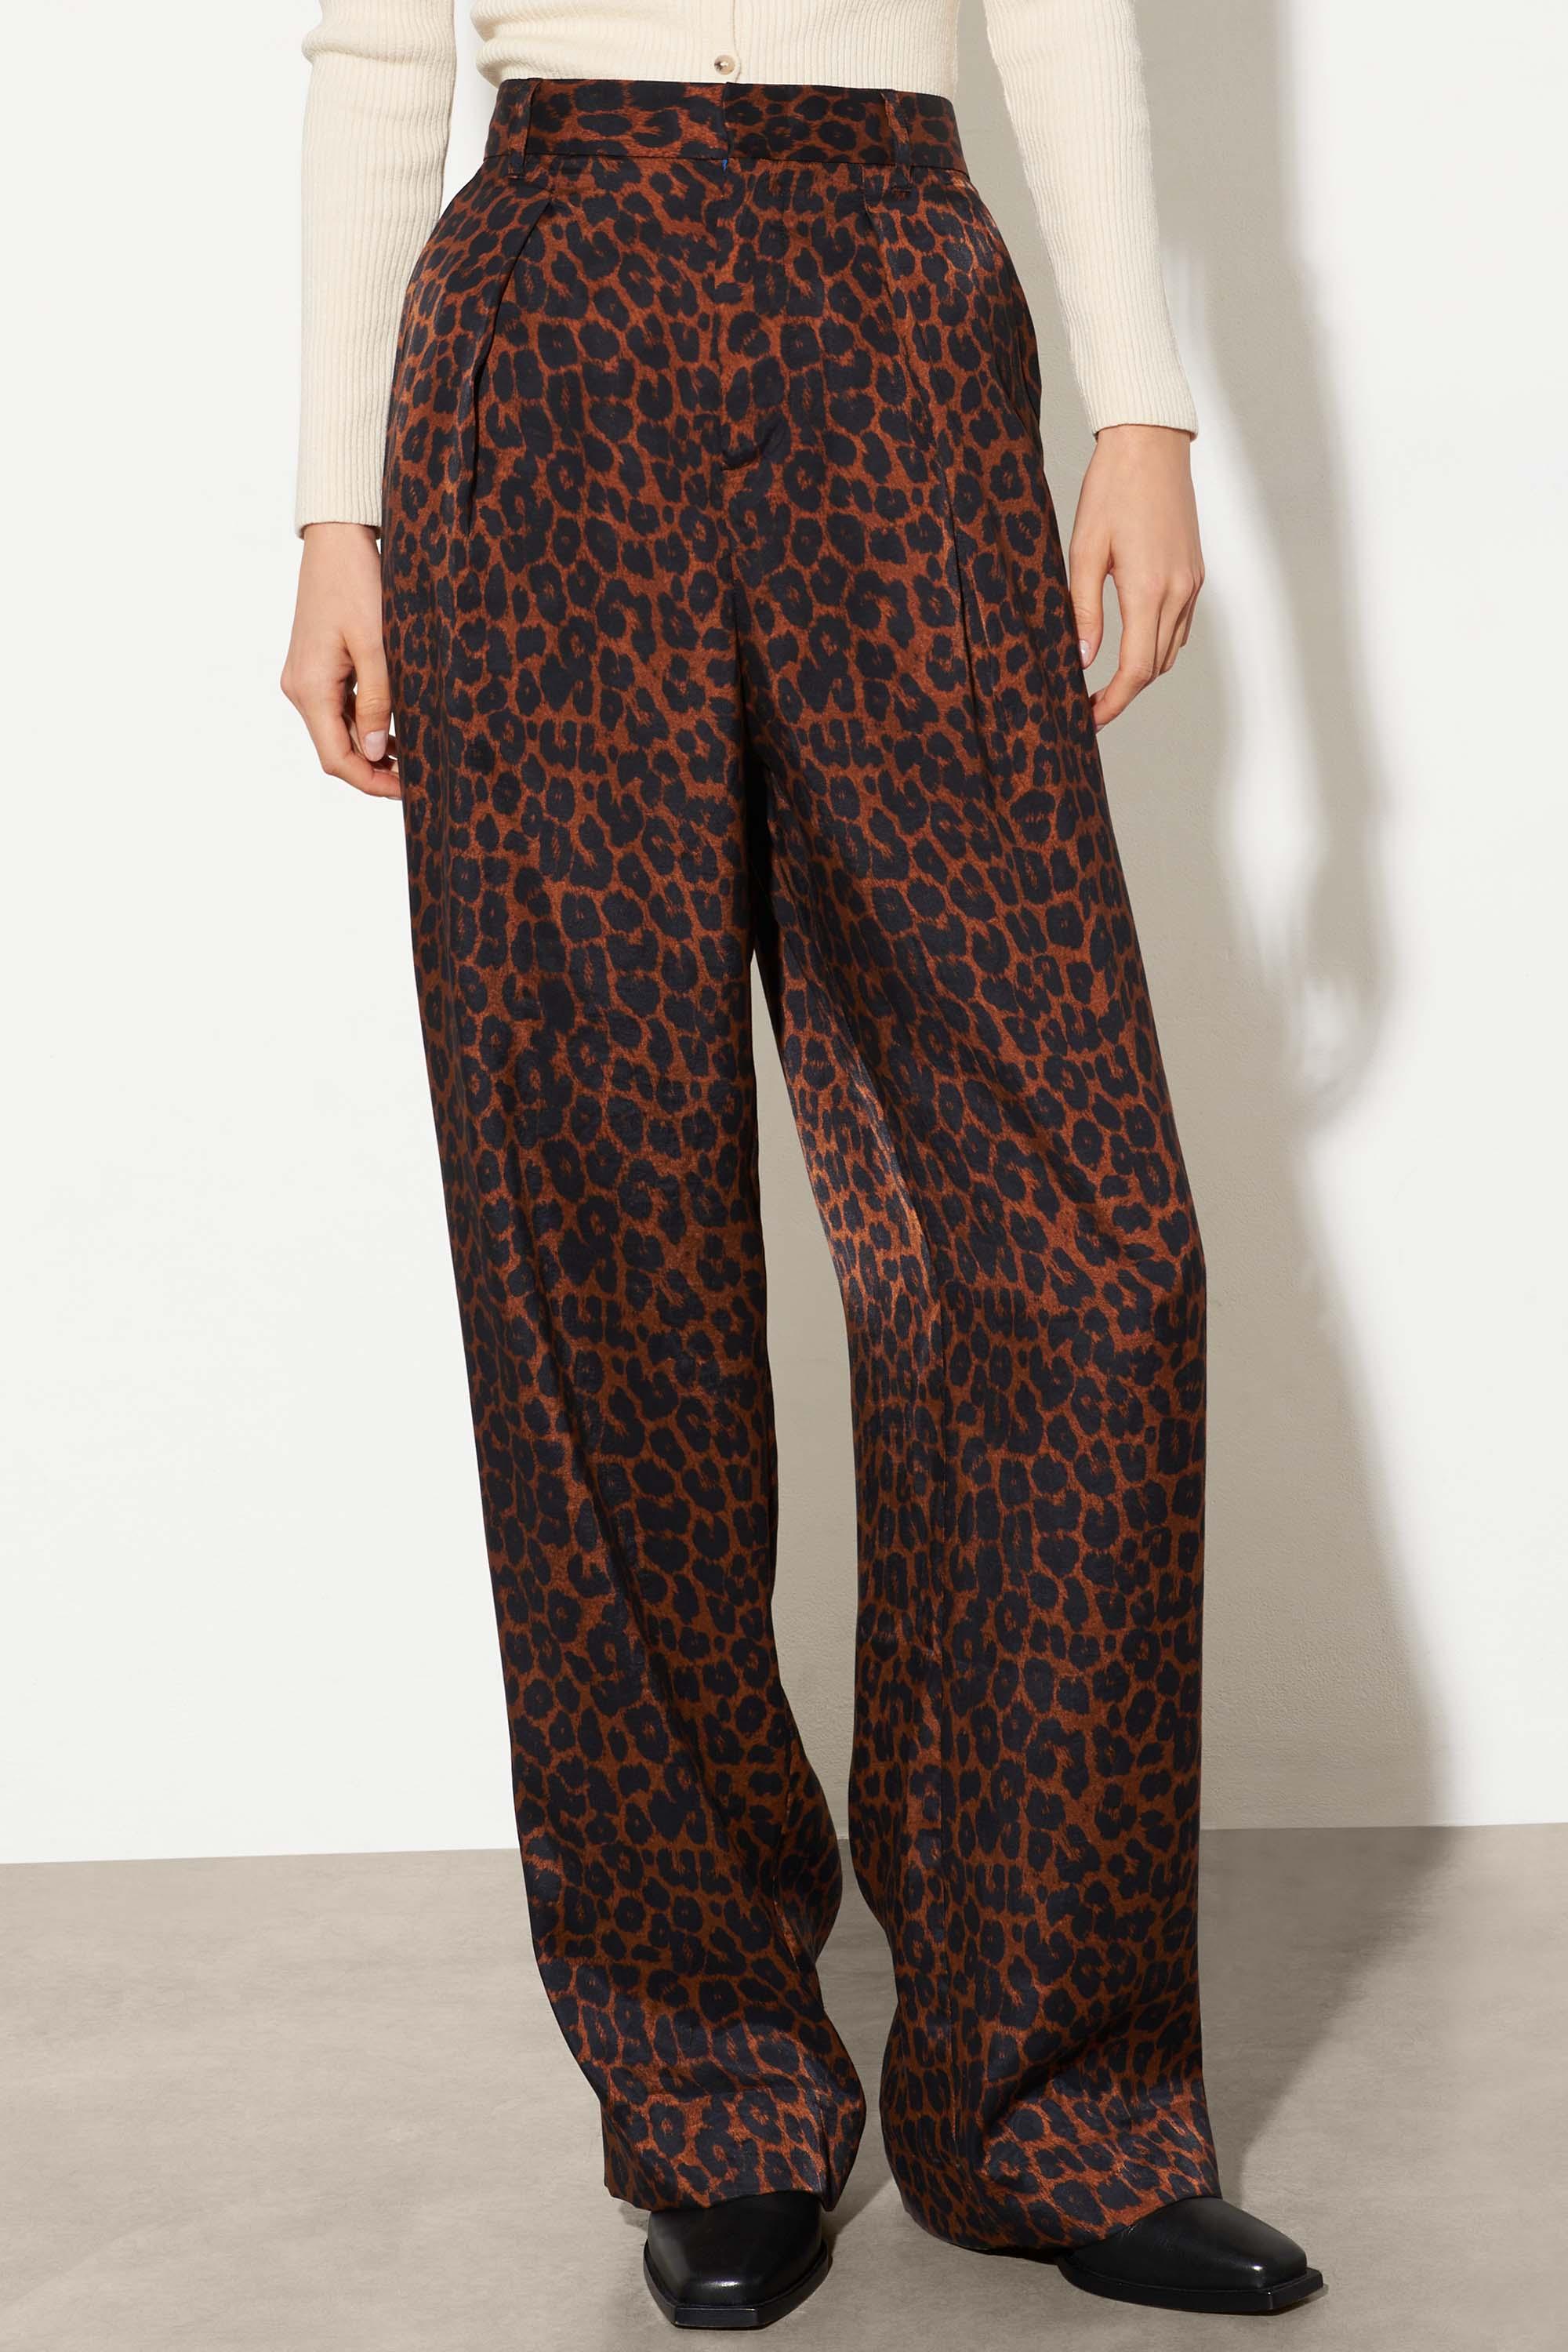 This is the nicest zebra print on pants I have seen, does anyone